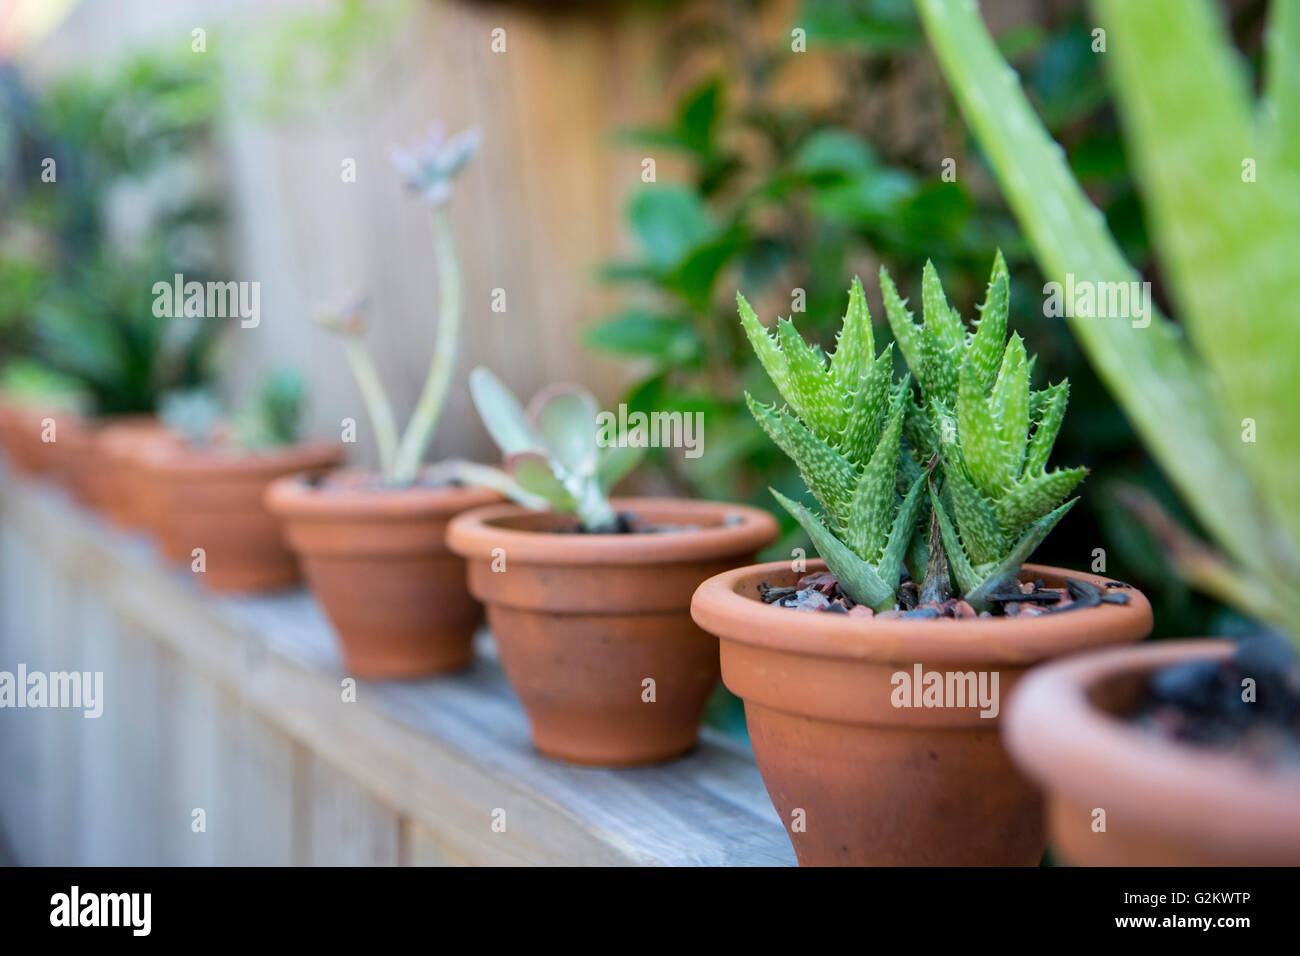 Row of Succulent Plants in Clay Pots Stock Photo